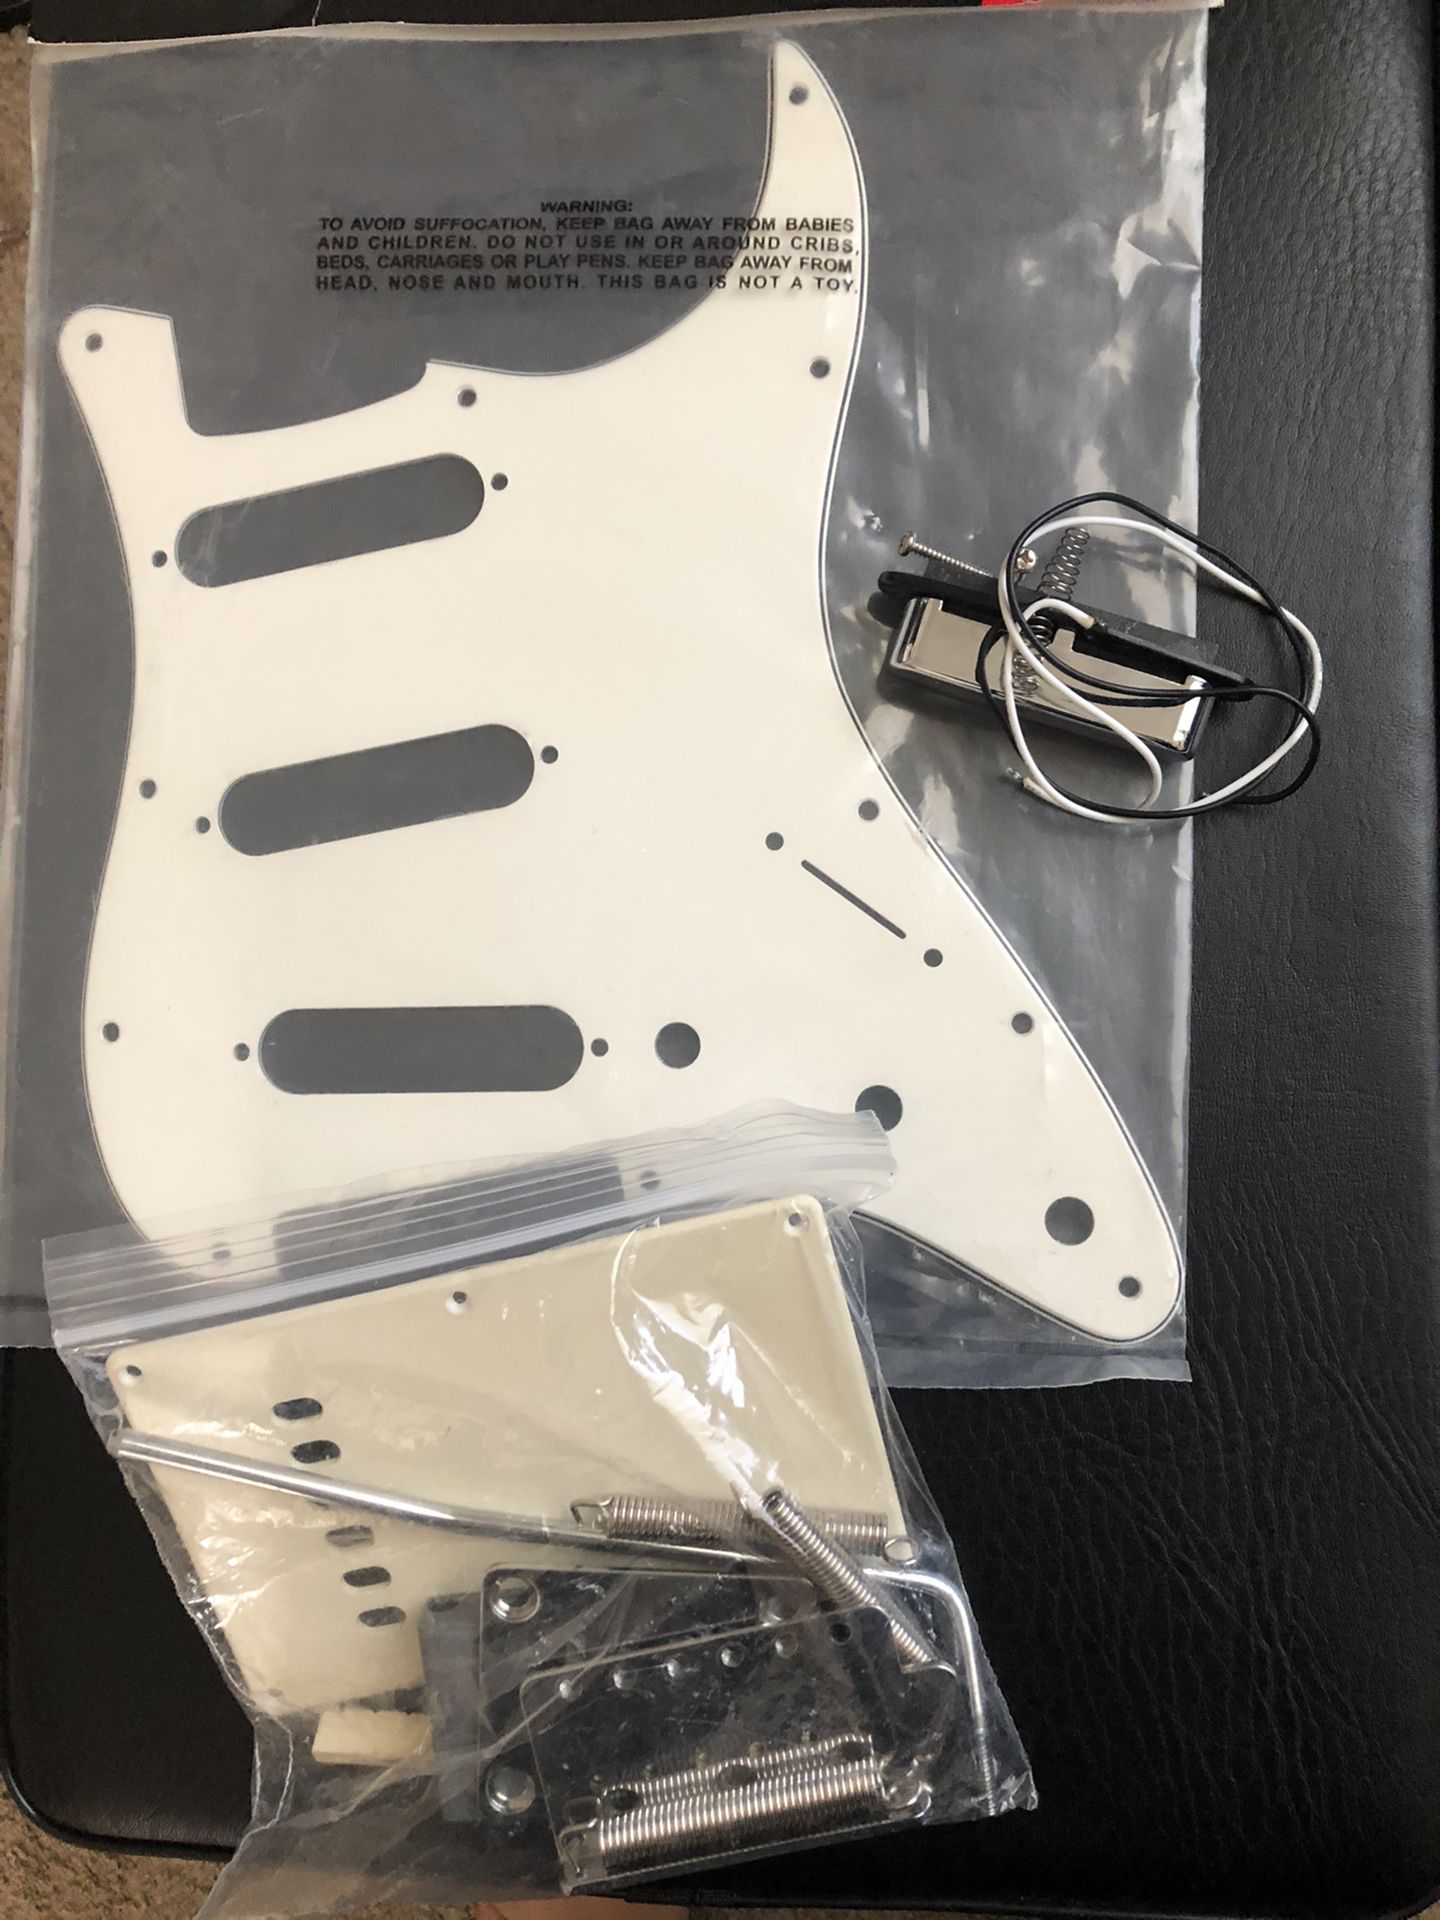 Electric Guitar project Parts